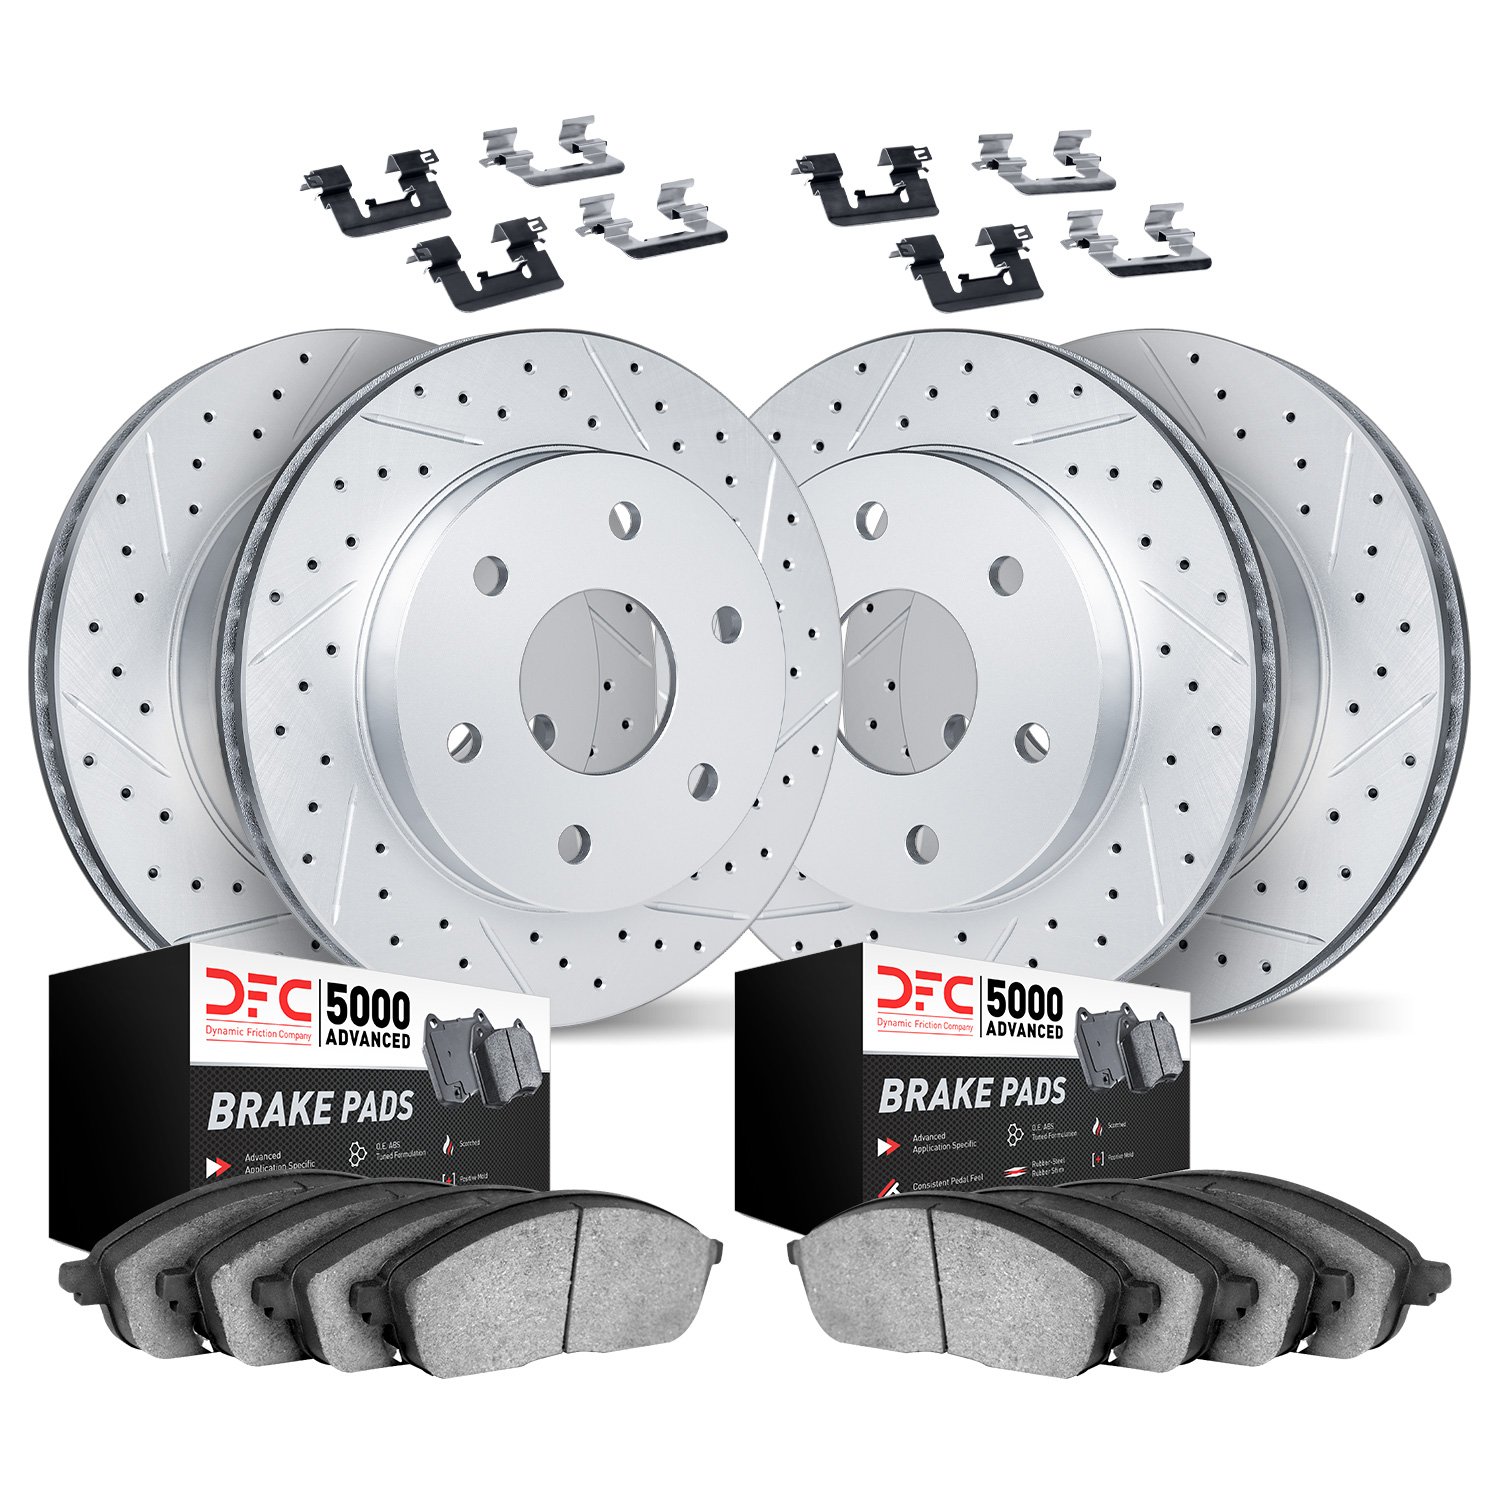 2514-48031 Geoperformance Drilled/Slotted Rotors w/5000 Advanced Brake Pads Kit & Hardware, 2007-2014 GM, Position: Front and Re